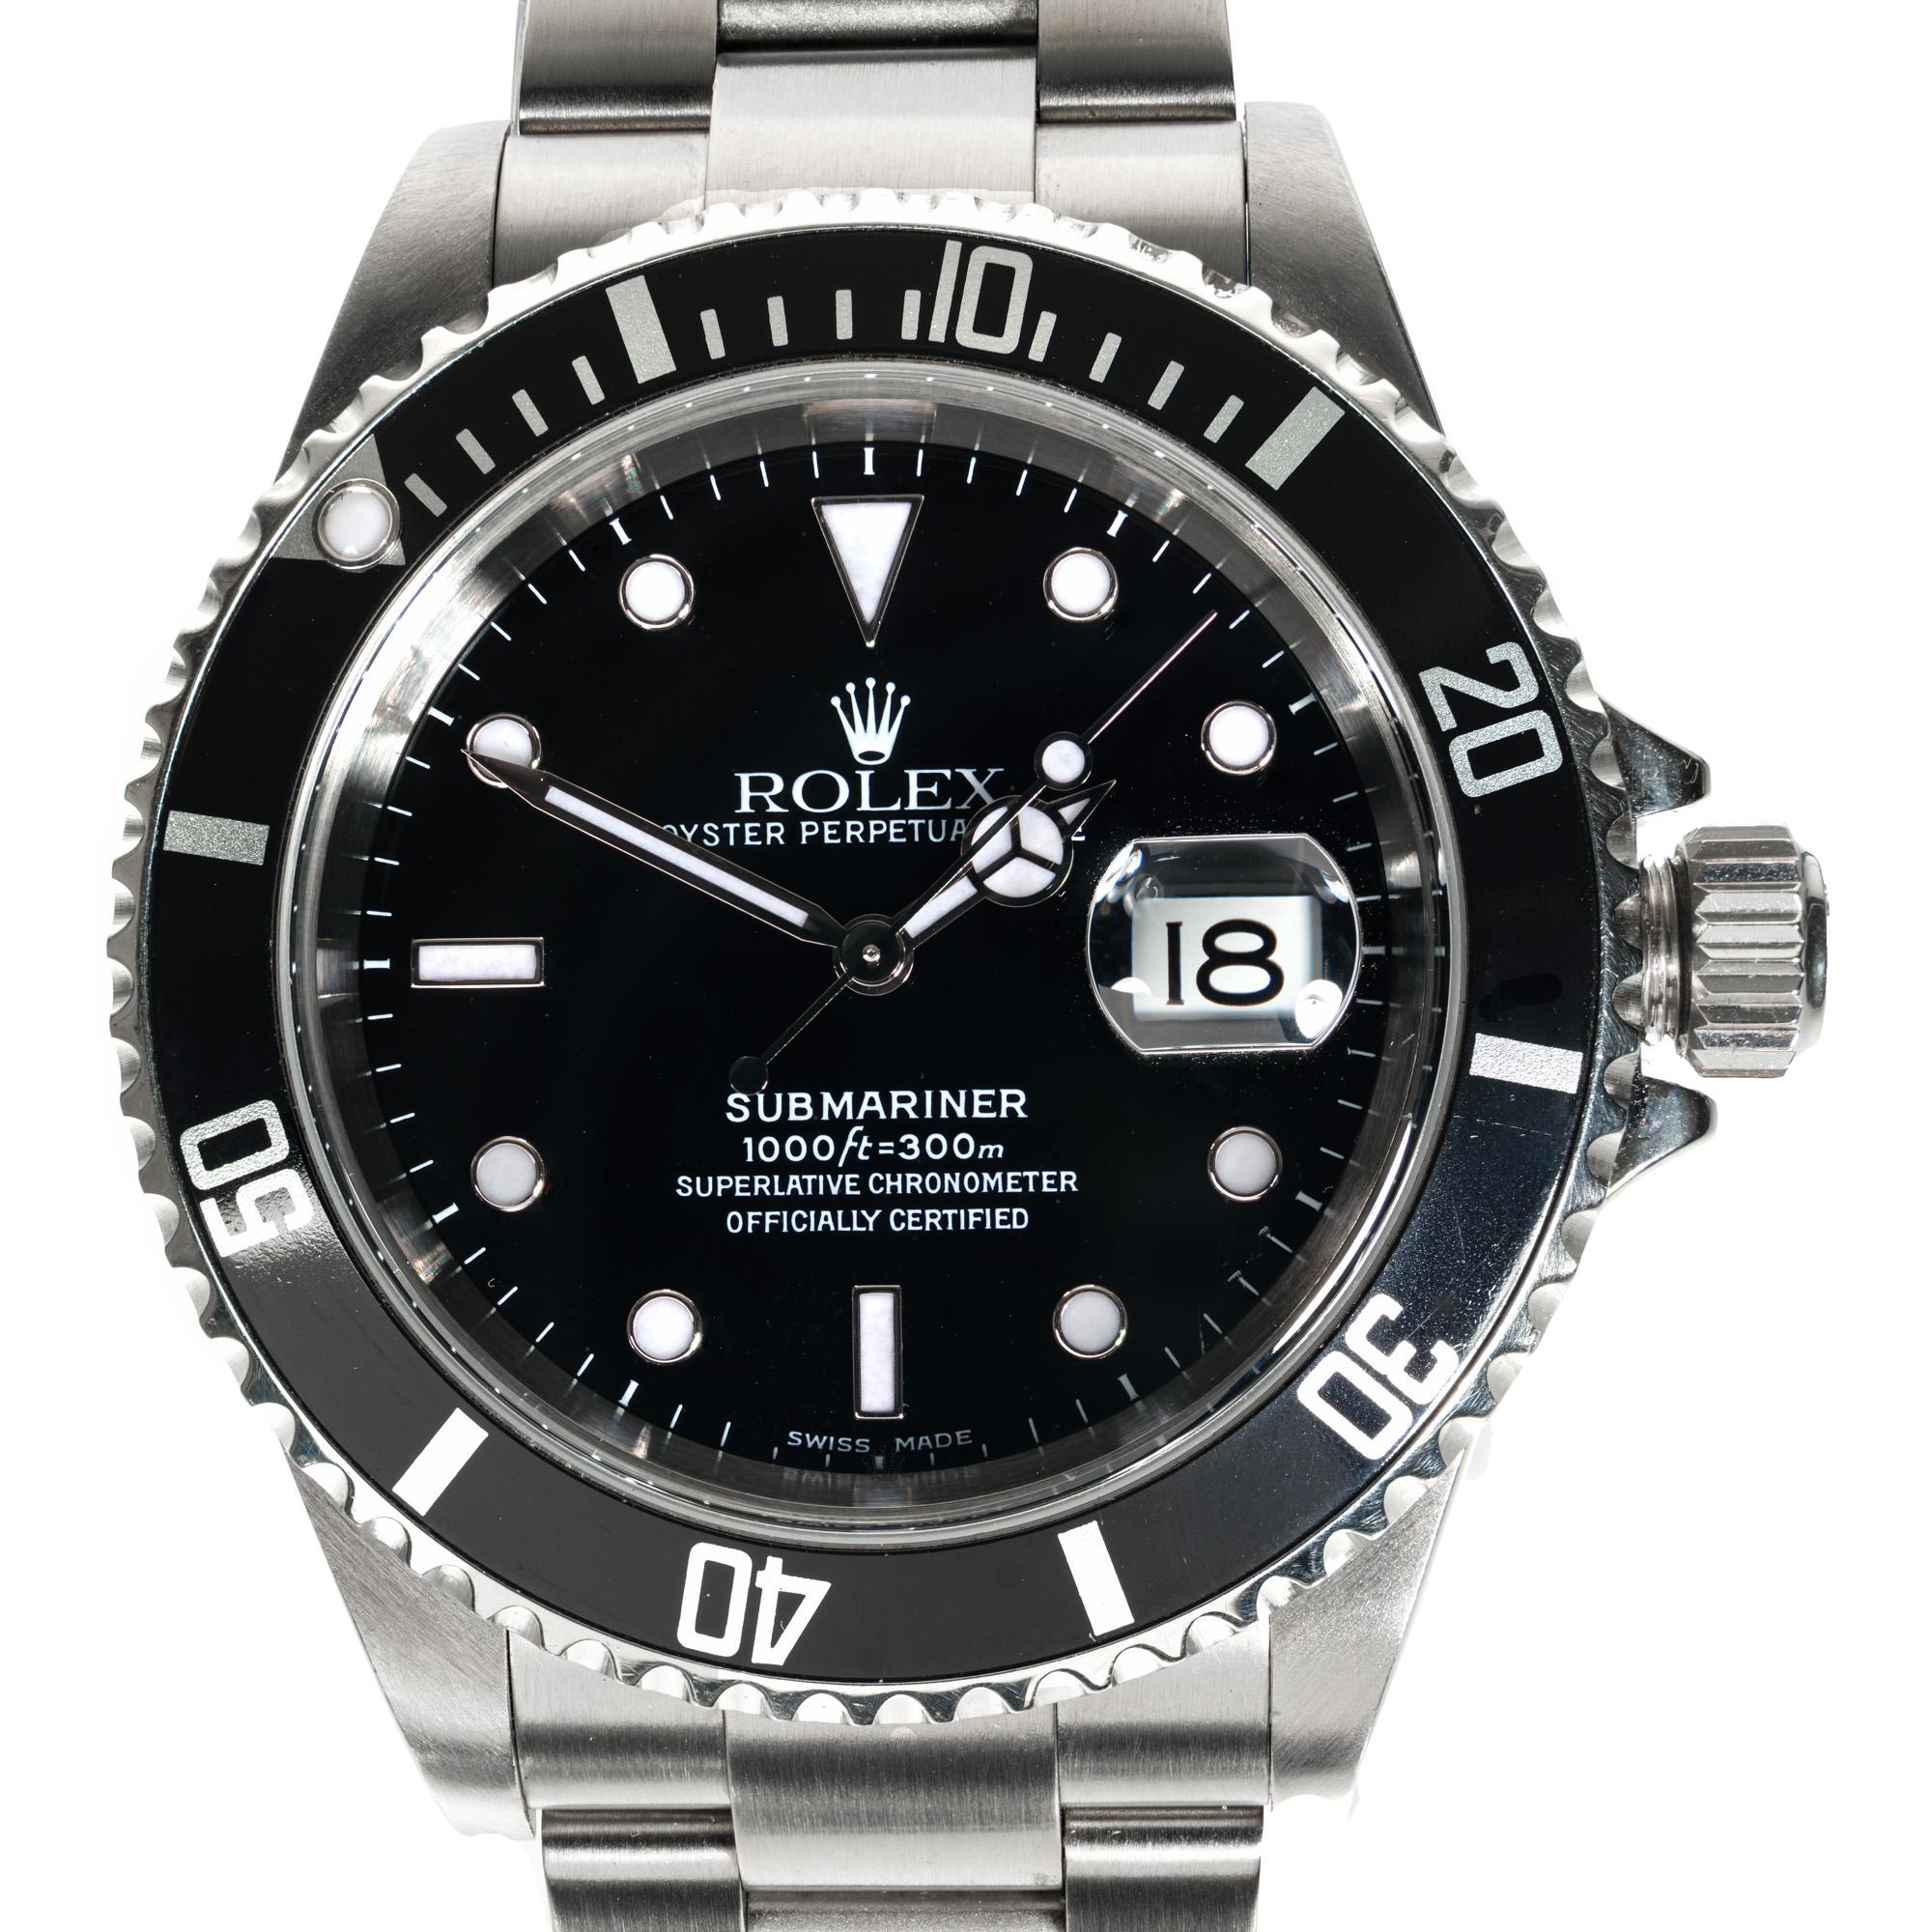 Men's stainless steel Rolex submariner circa 2002 with oyster band. All original. 40mmFully serviced. One year service warranty.

Length: 47.35mm
Width: 40mm
Band width at case: 20mm
Case thickness: 14mm
Band: Oyster stainess steel 
Crystal: